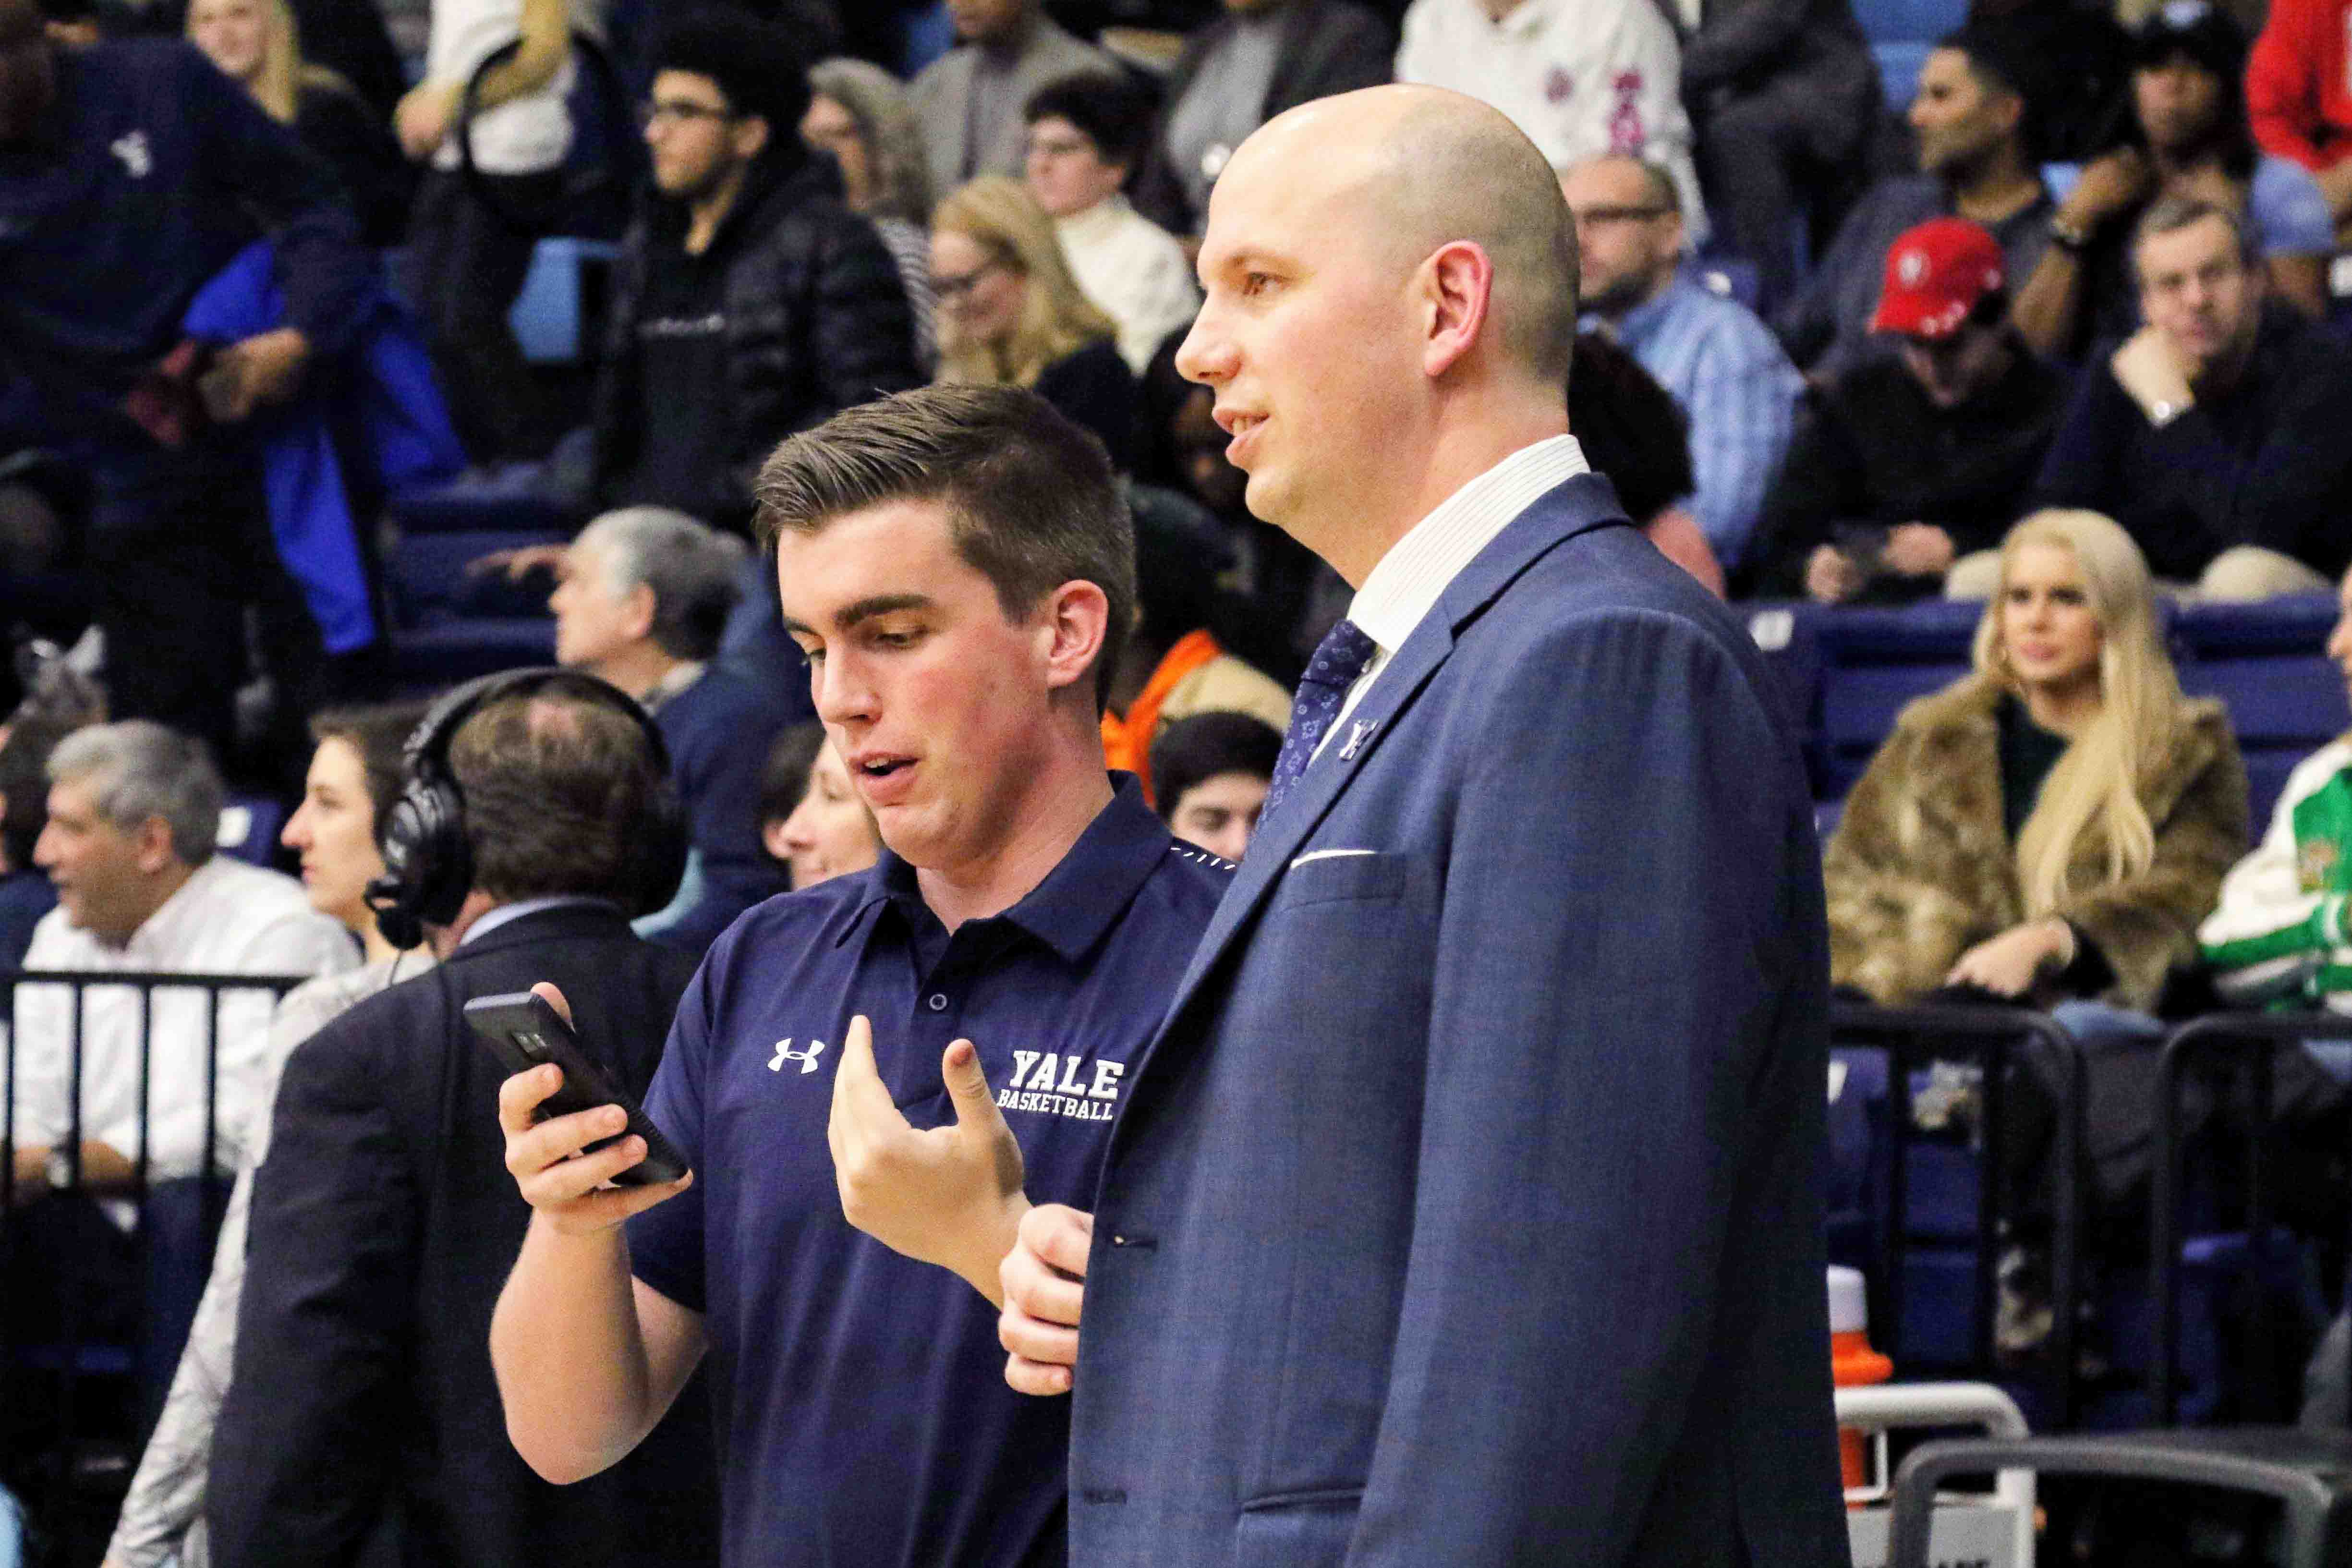 MEN'S BASKETBALL: Manager Chupp '19 boosts Elis from bench - Yale Daily News